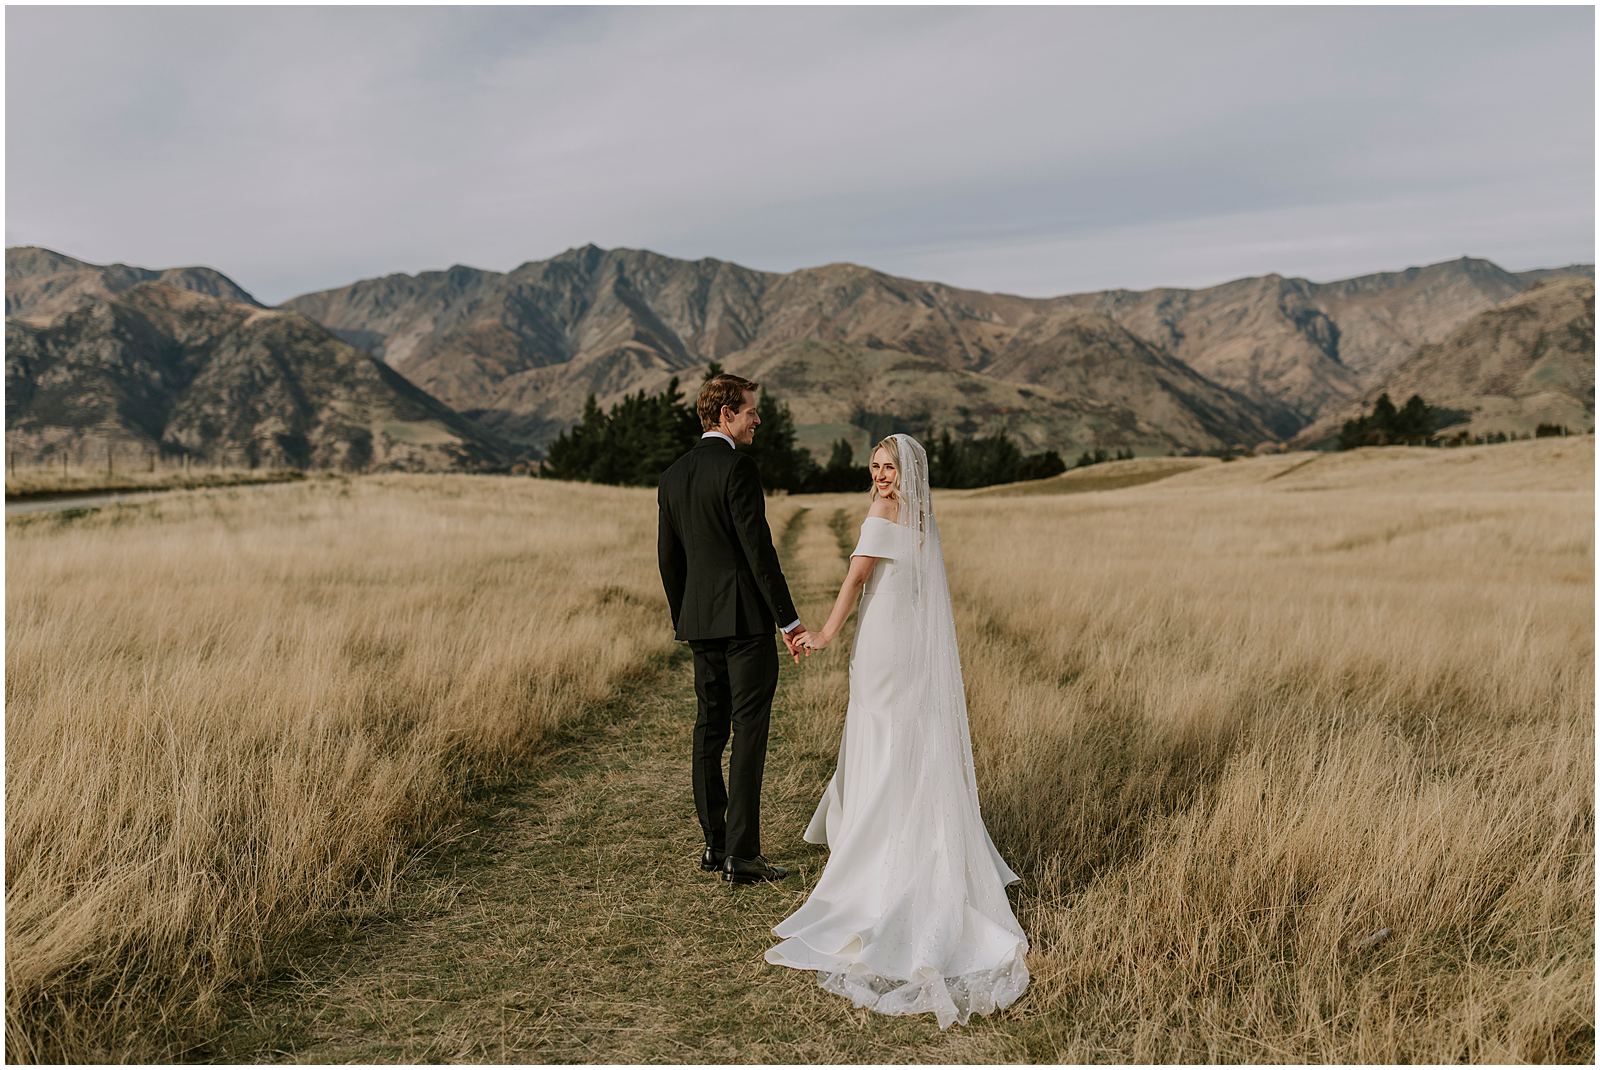 Charlotte Kiri Photography - Wedding Photography of a bride wearing a pretty off-shoulder gown with a long train and pearl embellished veil, holding hands with her groom who wears a smart black suit as they walk down a grass road in the middle of a large field, with a backdrop of mountains behind, in Wanaka, New Zealand.